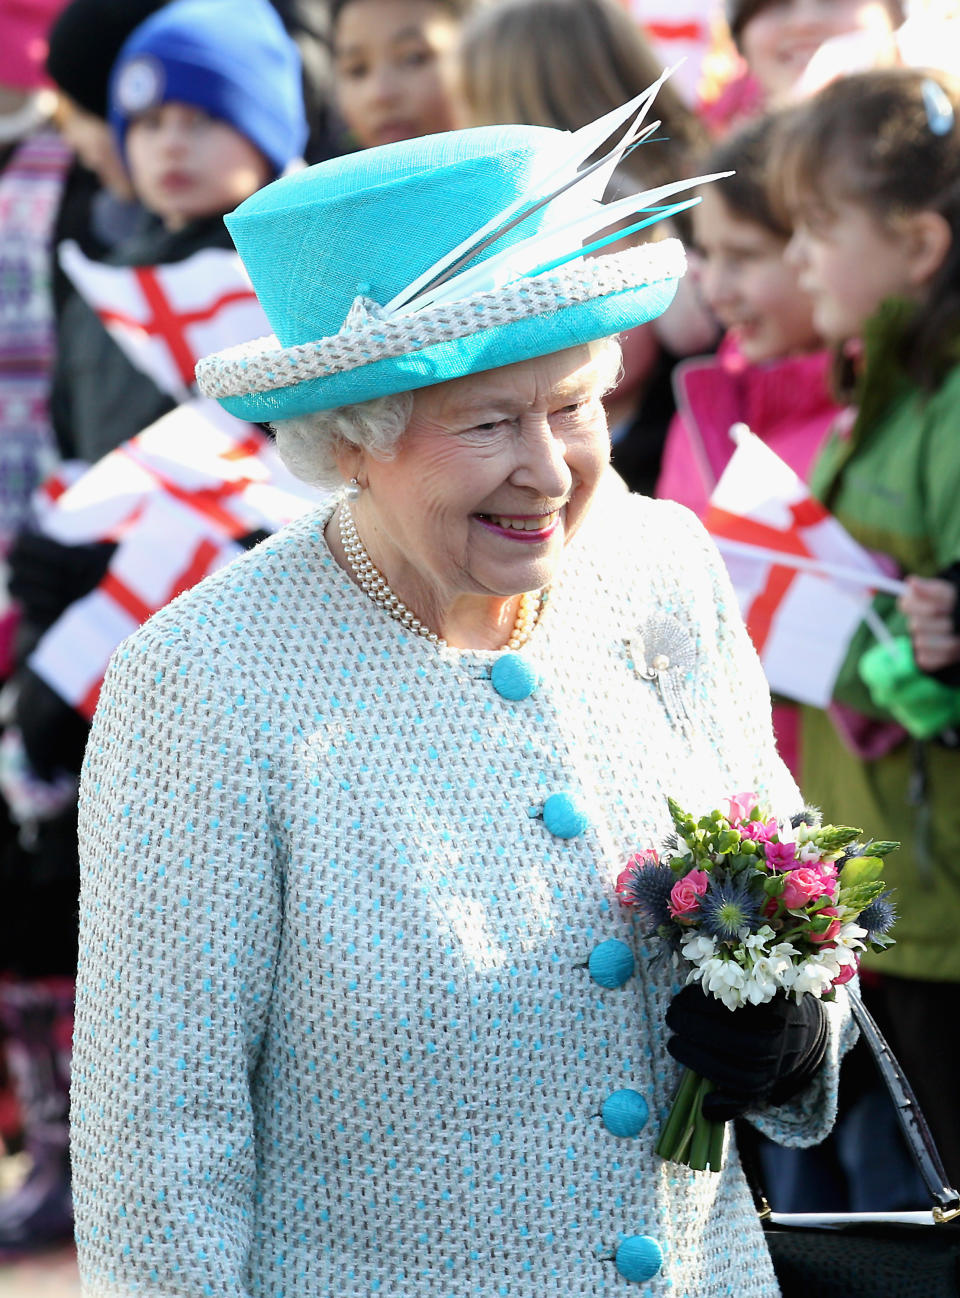 KING'S LYNN, ENGLAND - FEBRUARY 06: Queen Elizabeth II smiles as children wave flags during a visit to Dersingham School on February 6, 2012 in King's Lynn, England. The Queen made the visit to the school as she celebrates Accession Day and 60 years on the throne. (Photo by Chris Jackson/Getty Images)